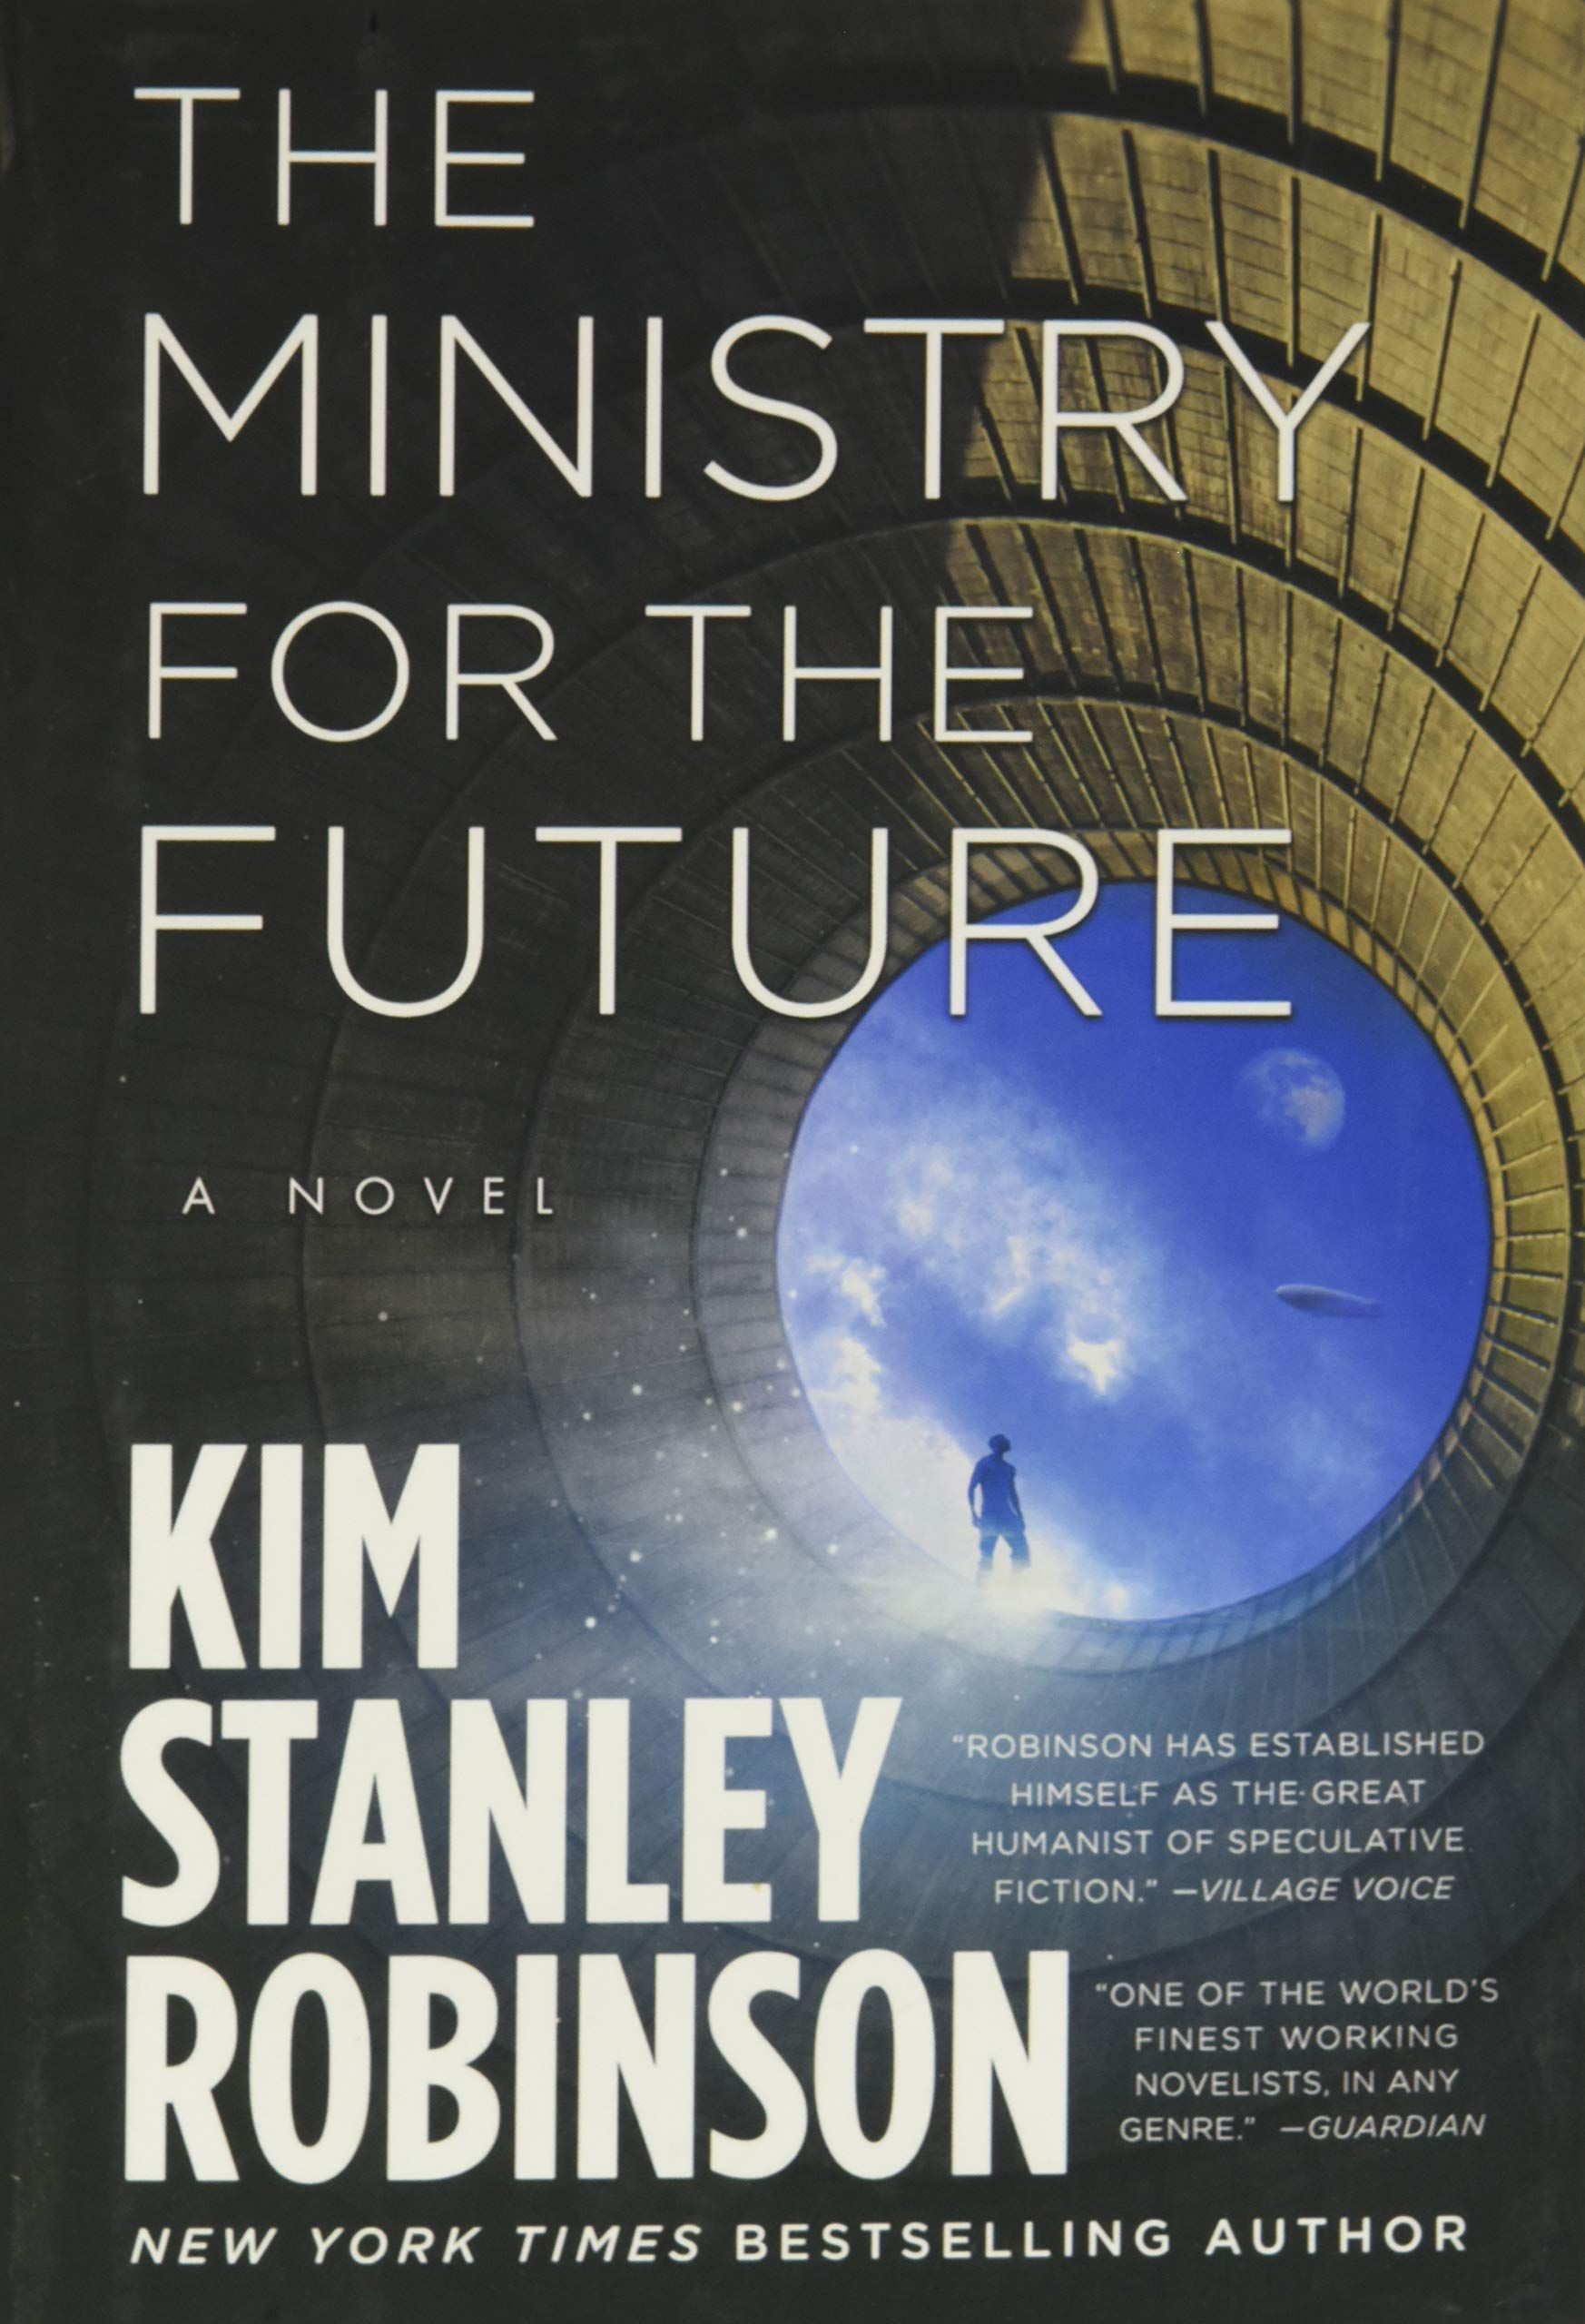 Of Course They Would: On Kim Stanley Robinson’s “The Ministry for the Future”